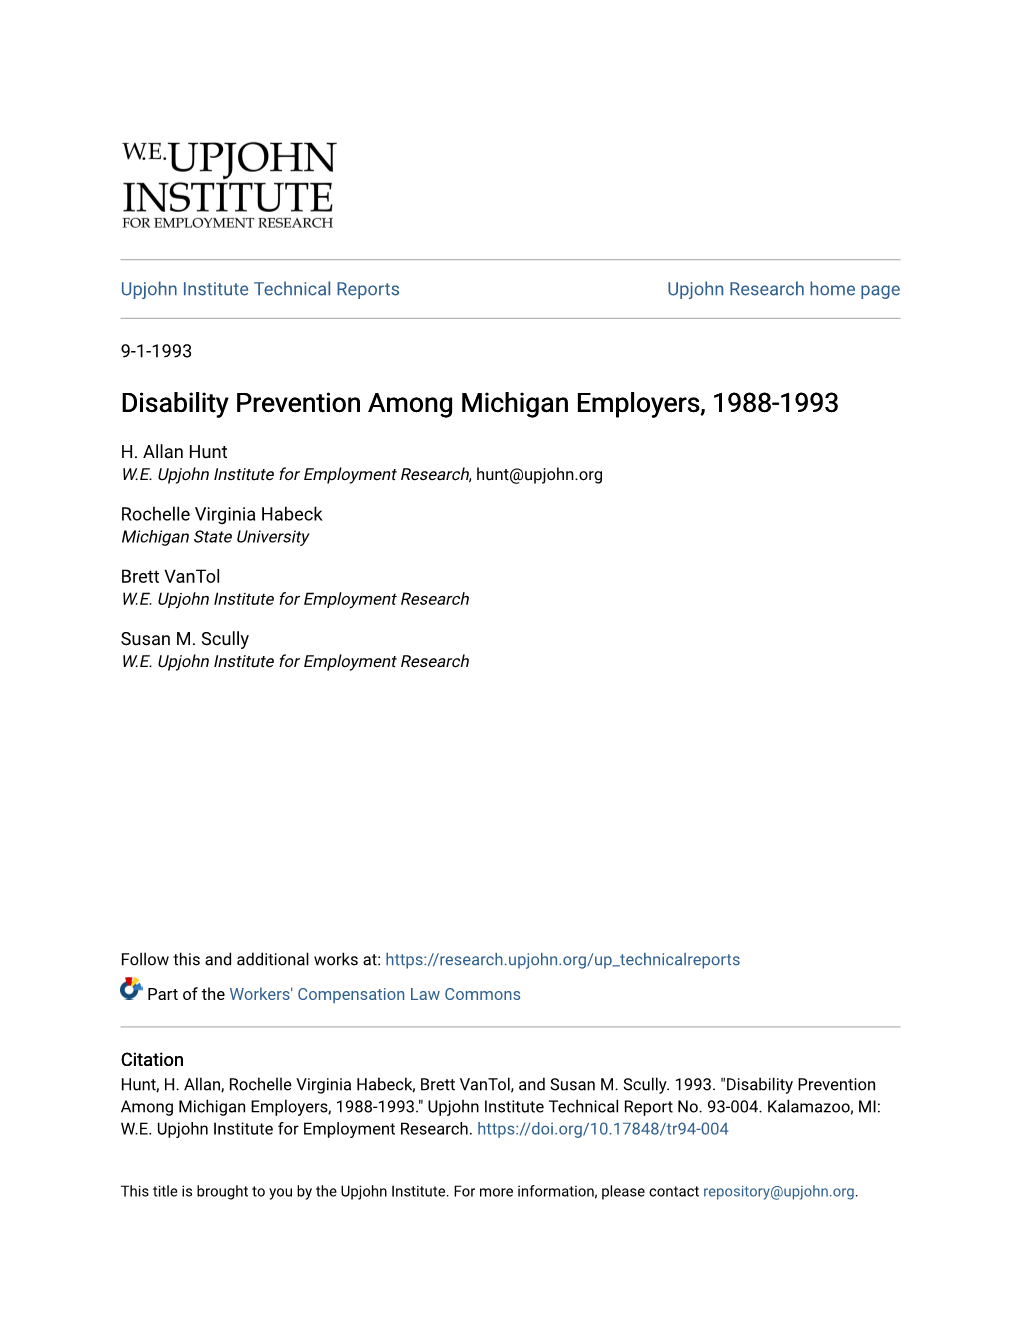 Disability Prevention Among Michigan Employers, 1988-1993